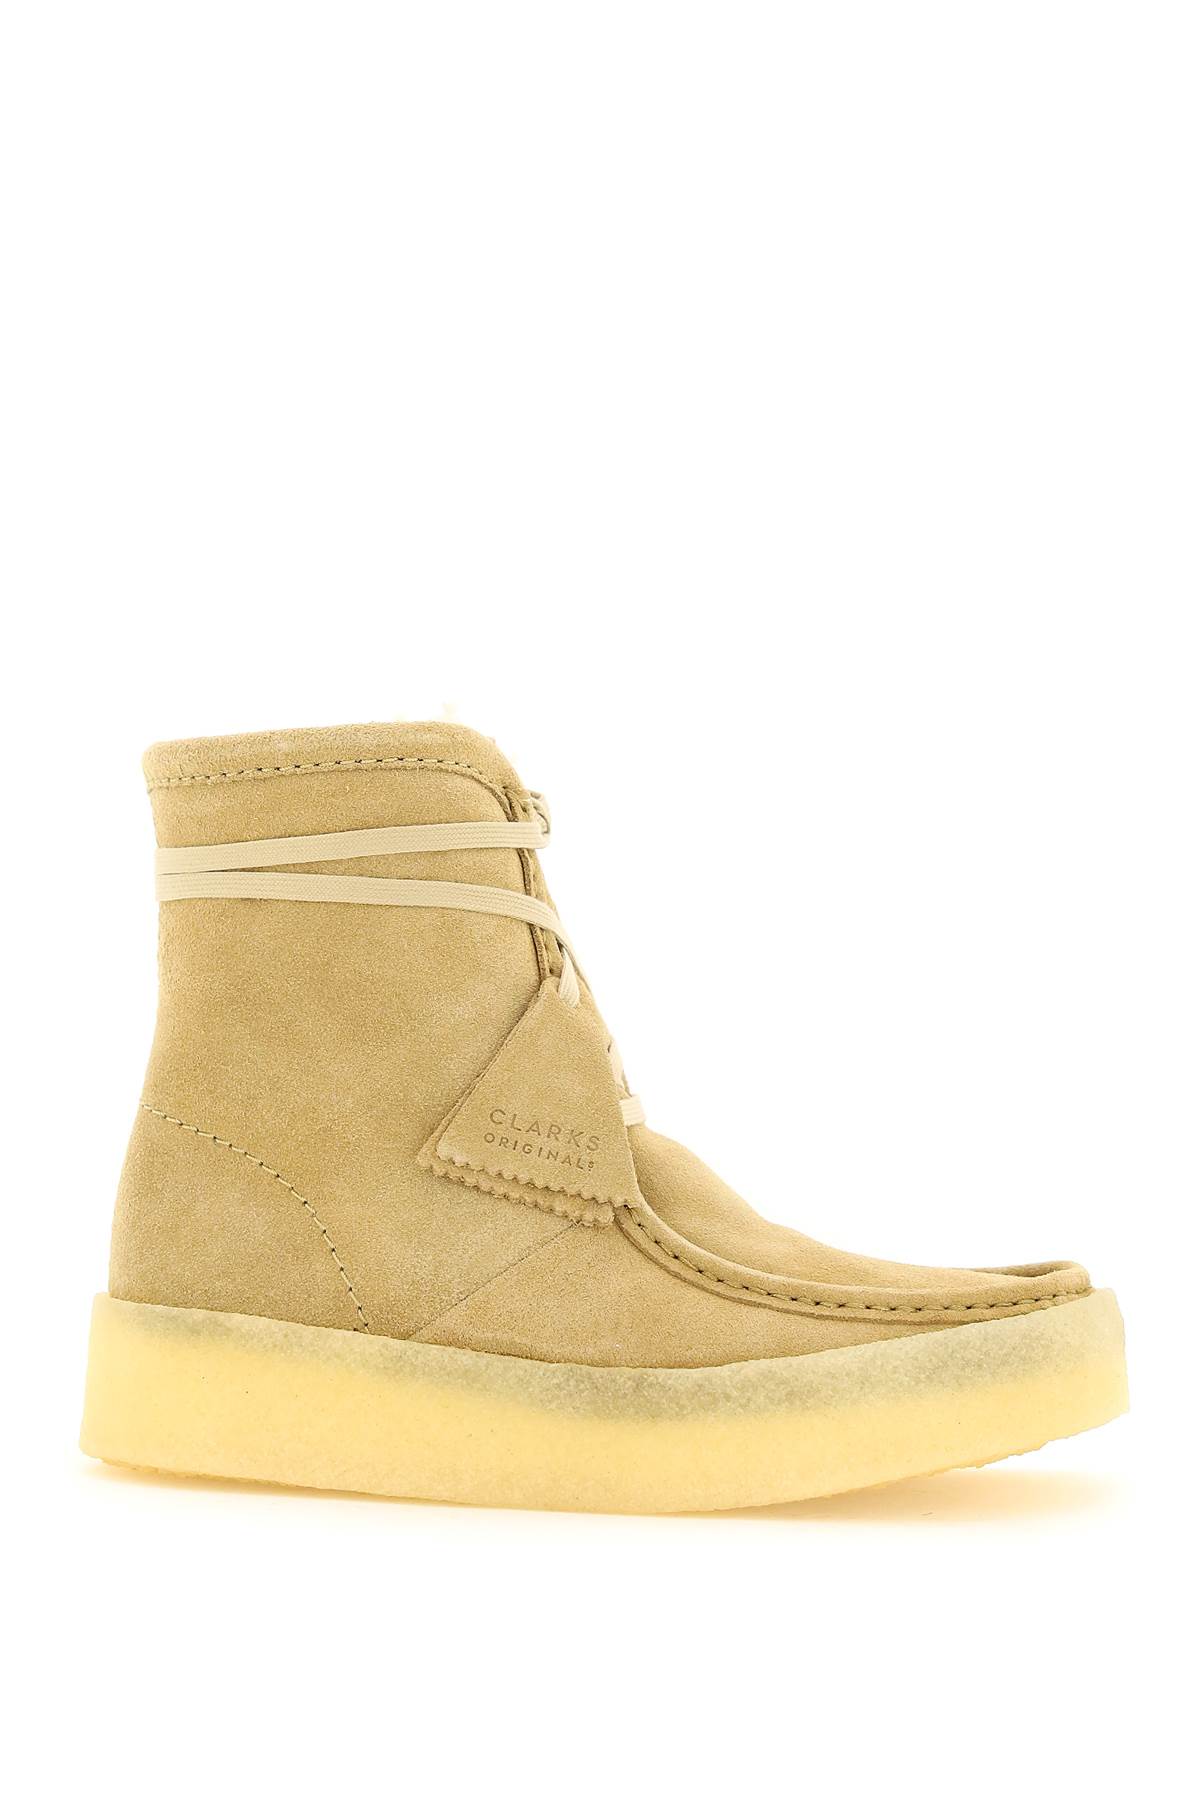 CLARKS WALLABEE CUP LACE-UP ANKLE BOOTS